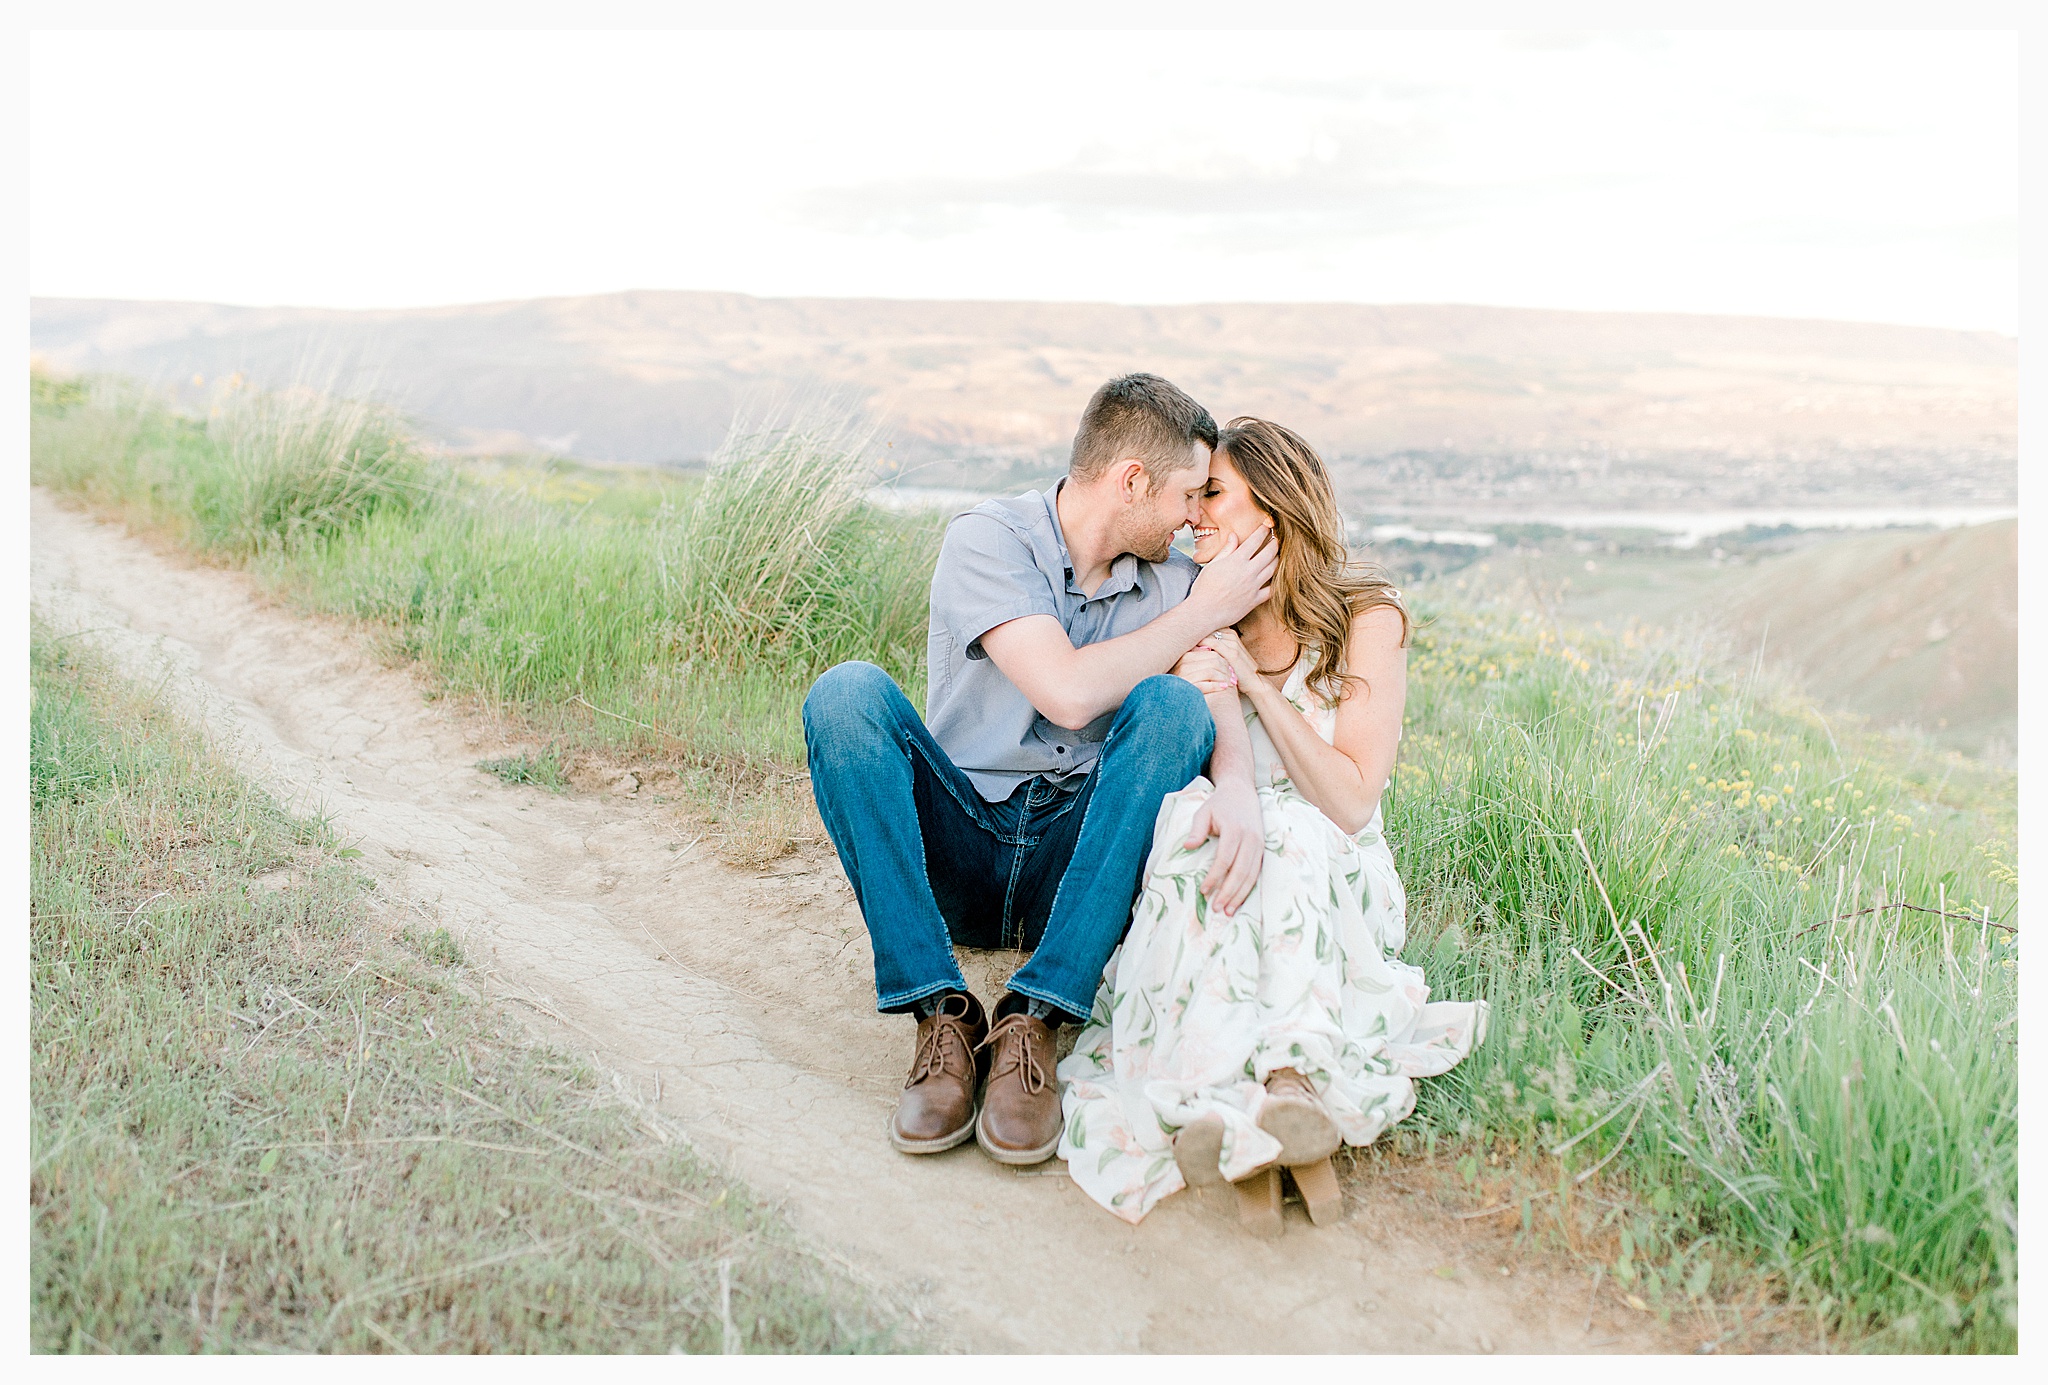 Engagement session amongst the wildflowers in Wenatchee, Washington | Engagement Session Outfit Inspiration for Wedding Photography with Emma Rose Company | Light and Airy PNW Photographer, Seattle Bride_0030.jpg